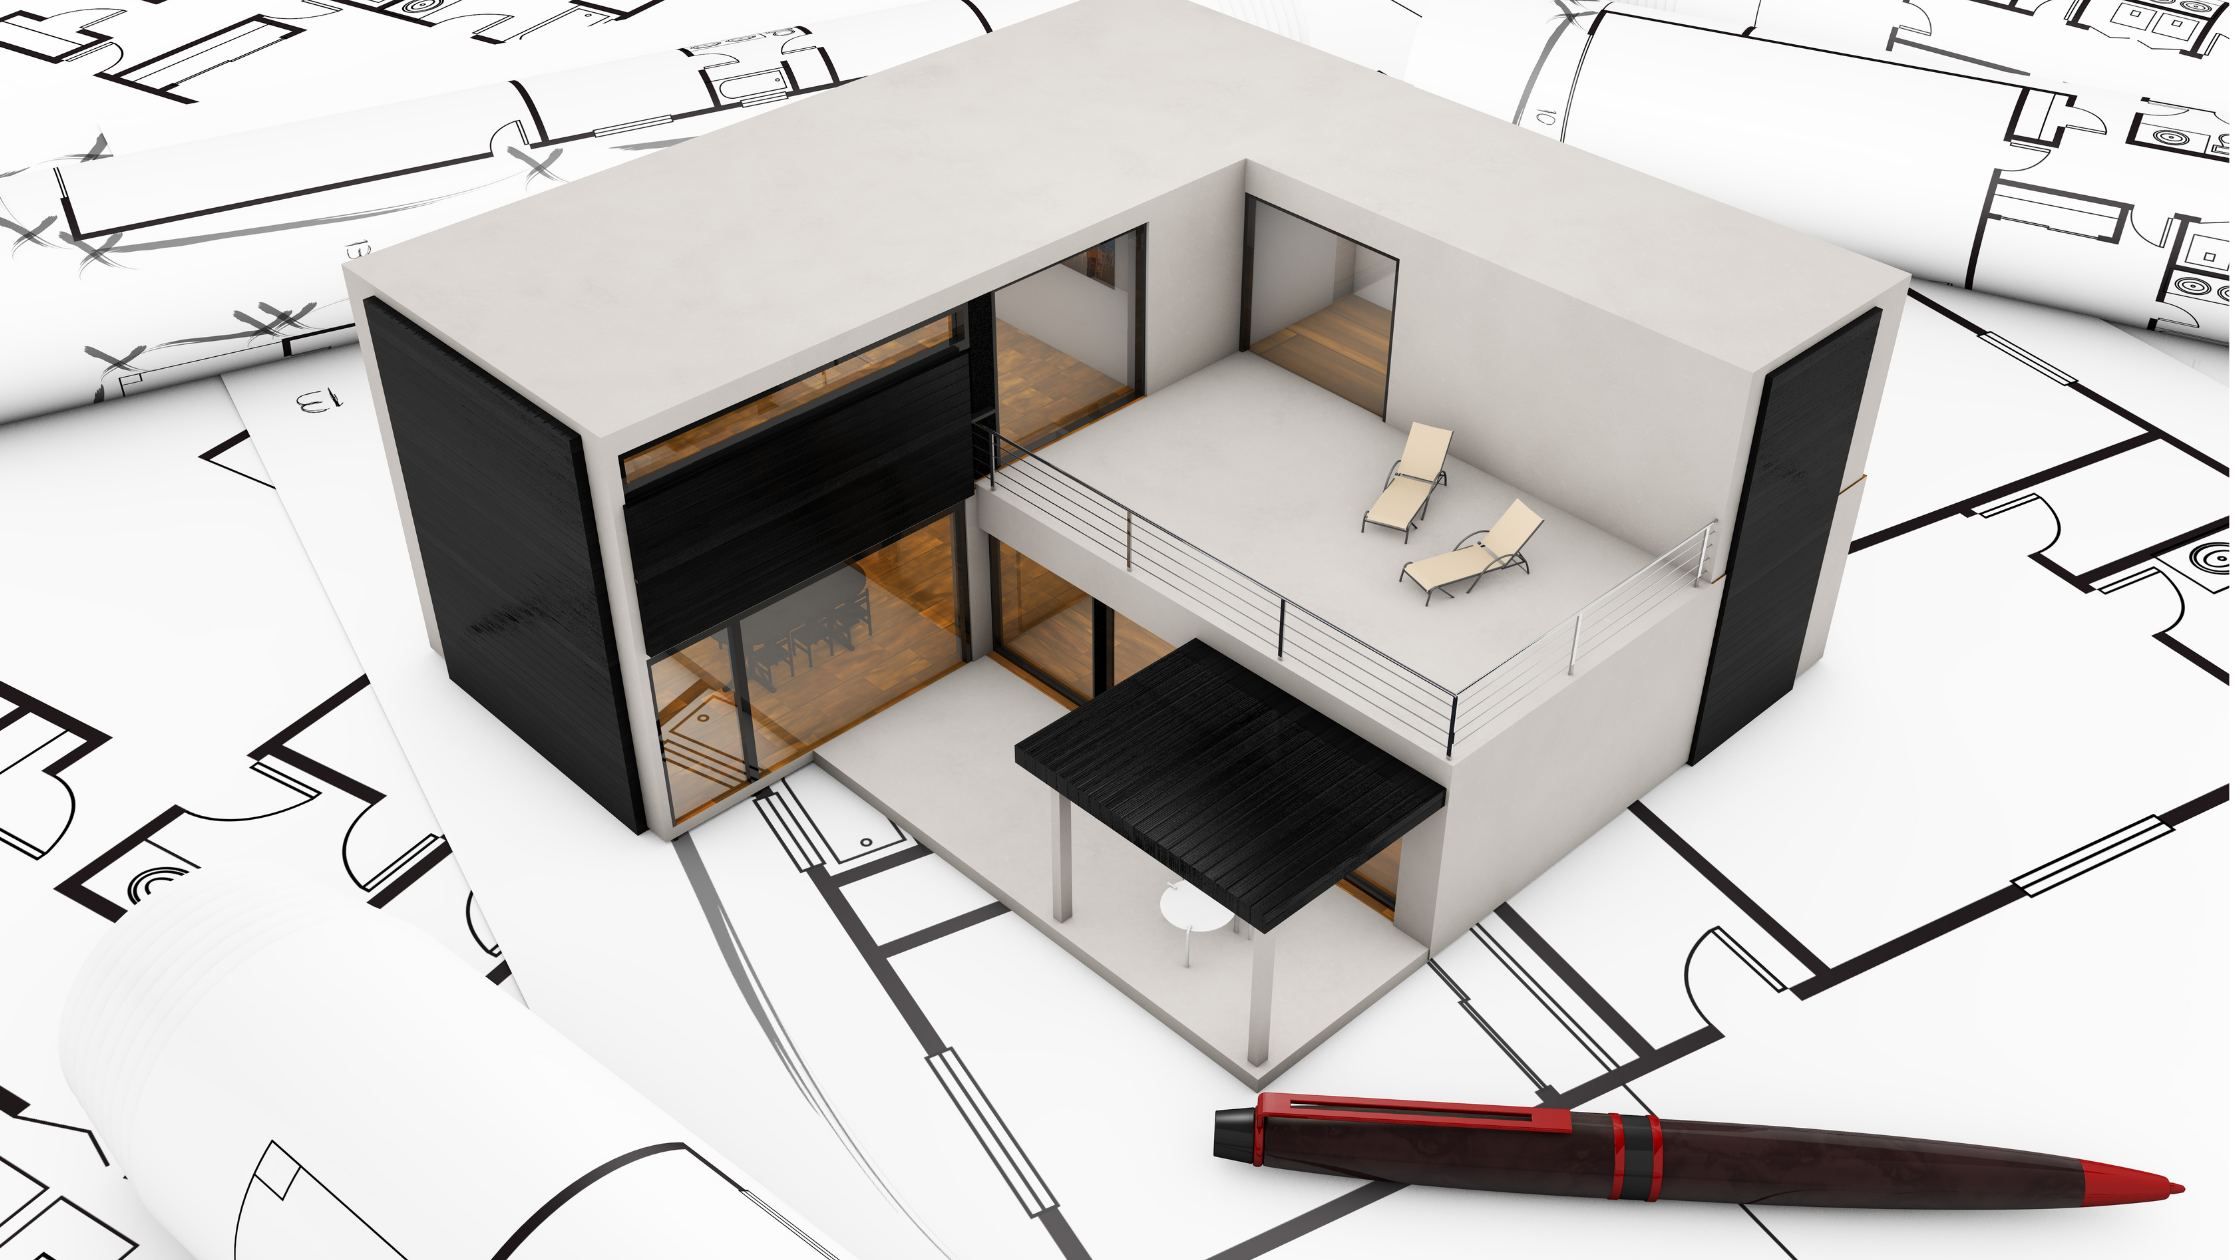 Drafting tools and building plans for modular design construction